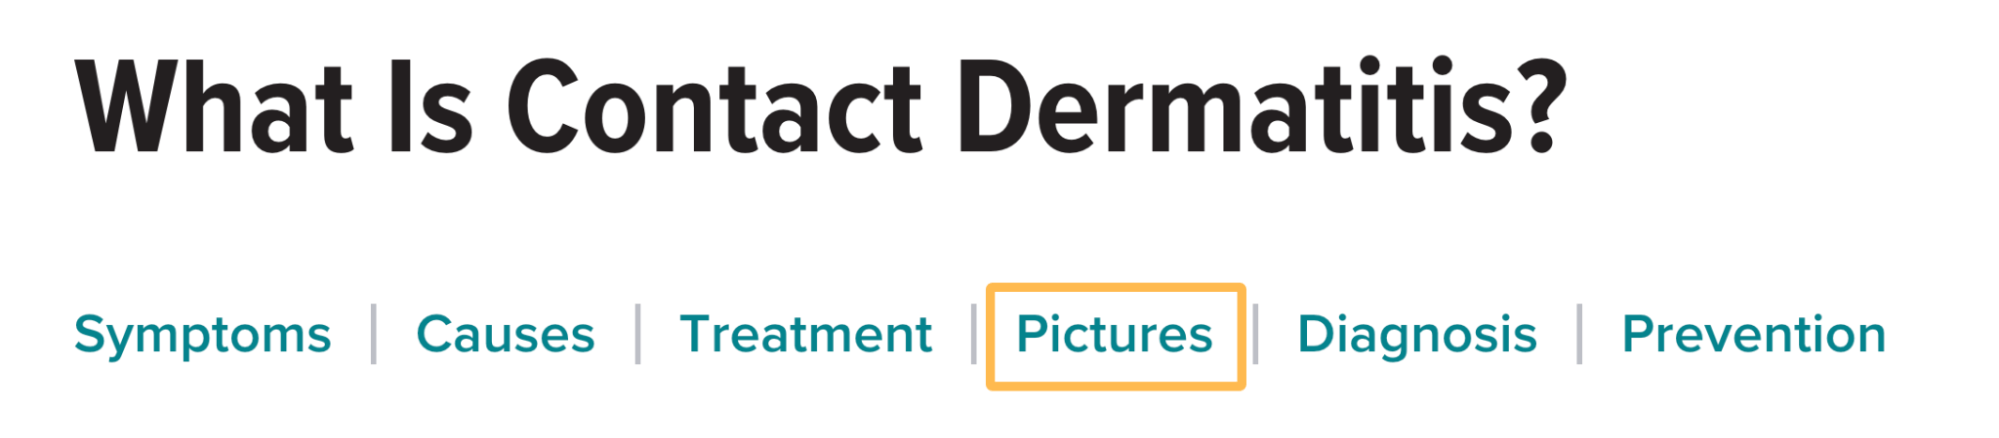 "Contact dermatitis" sections
